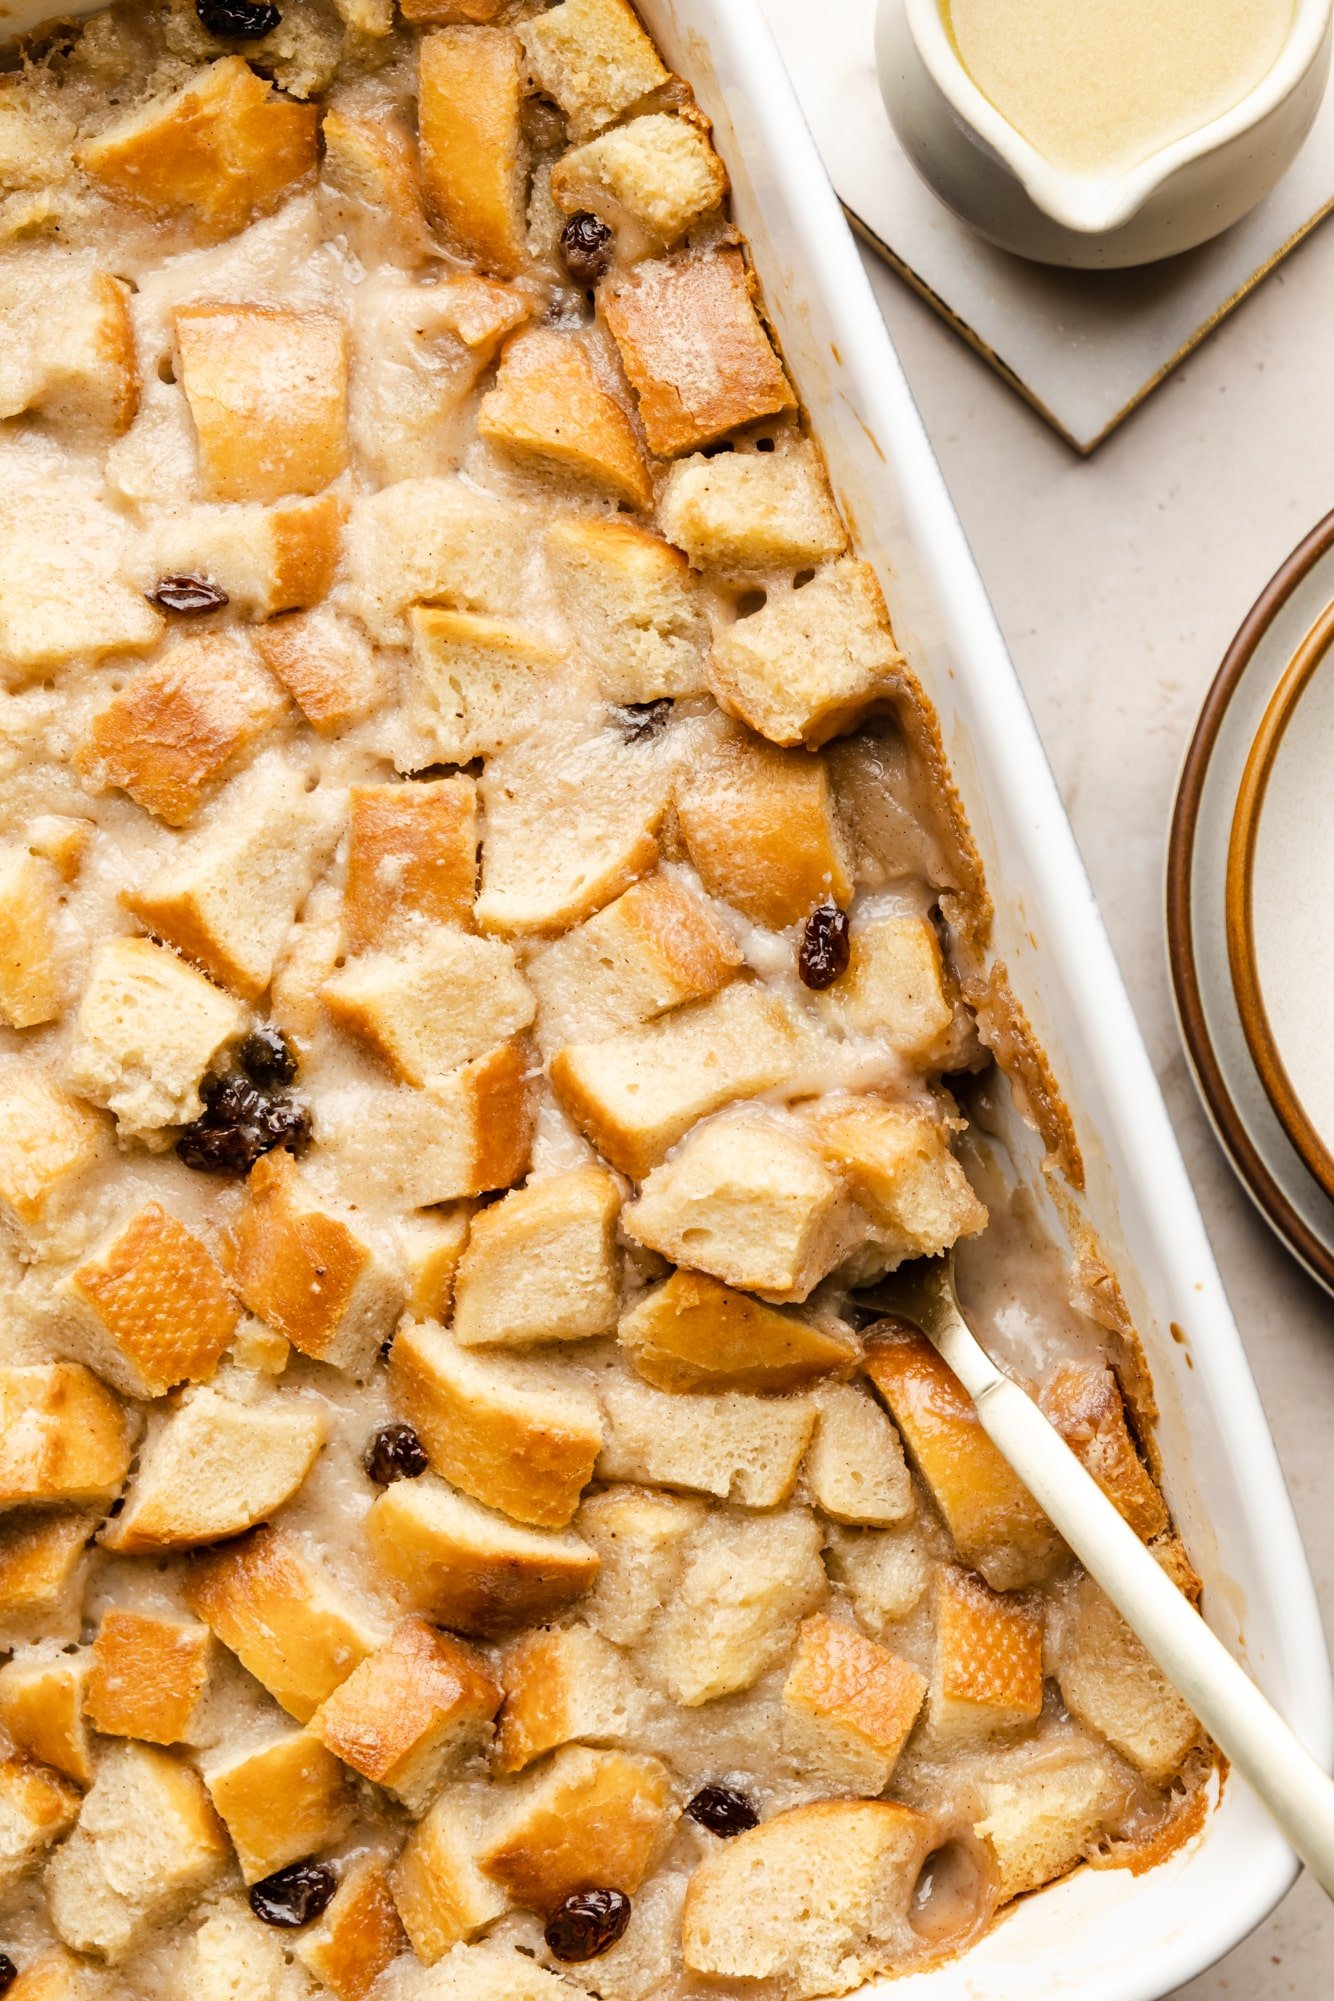 A spoon scooping vegan bread pudding from a white baking dish.